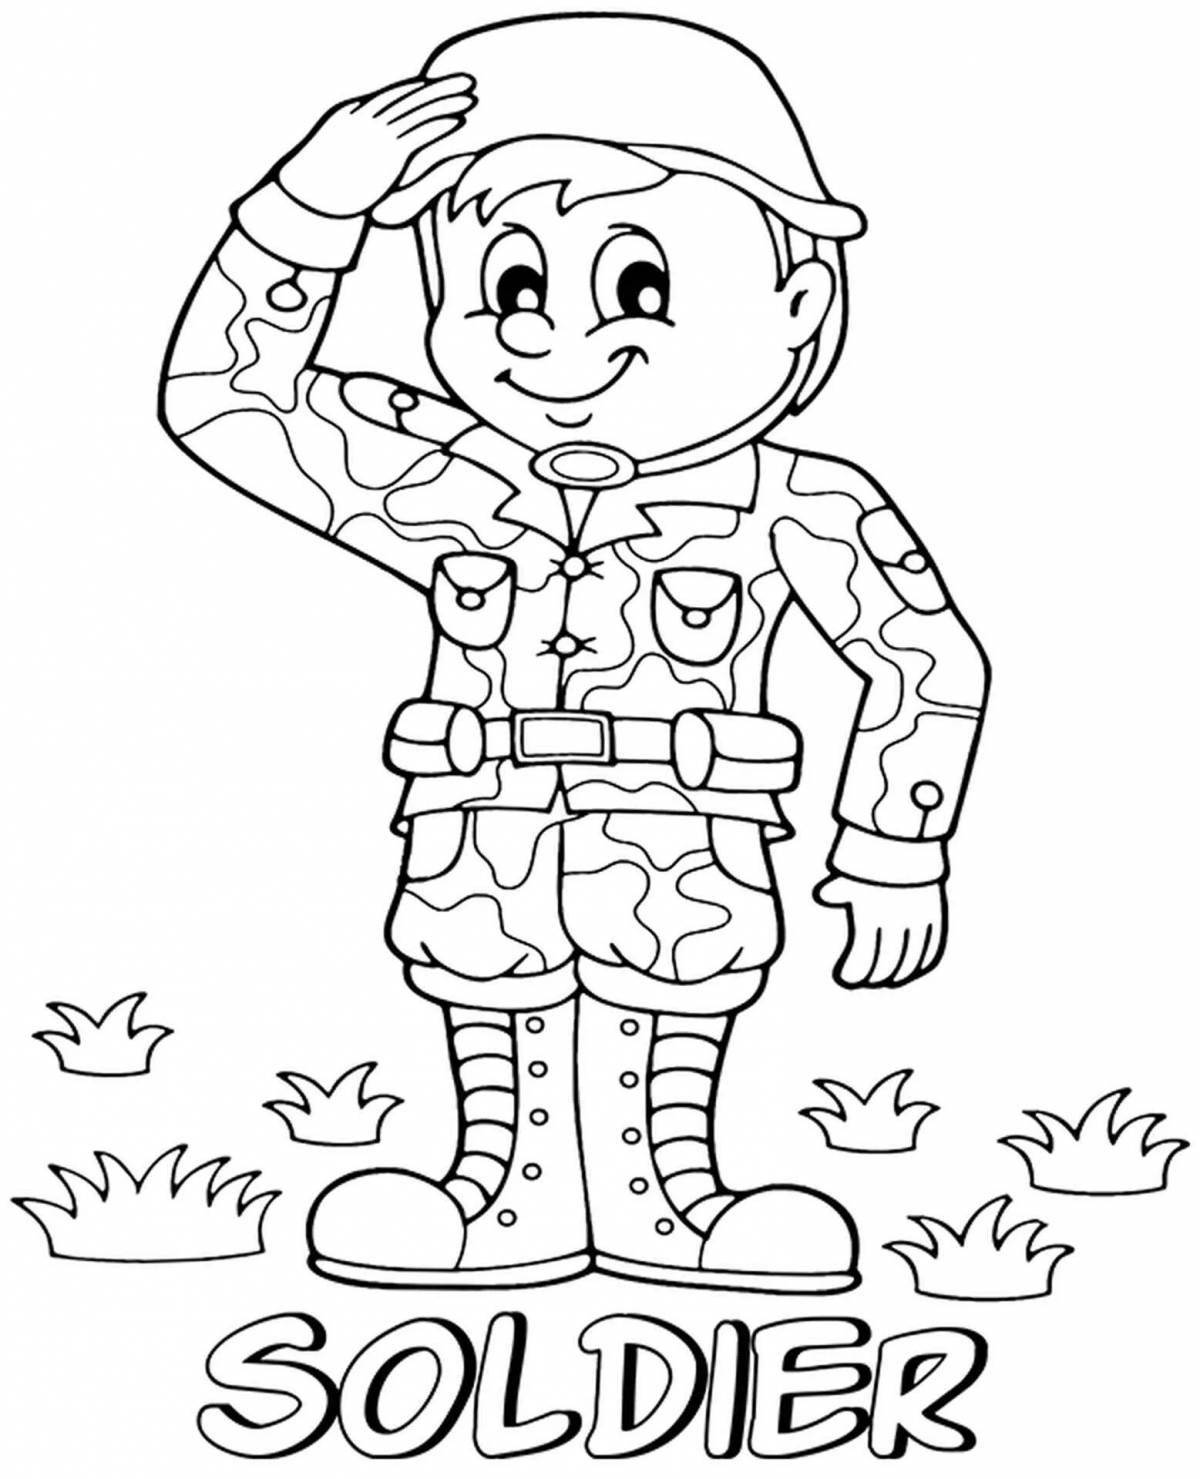 Military soldiers for children #4